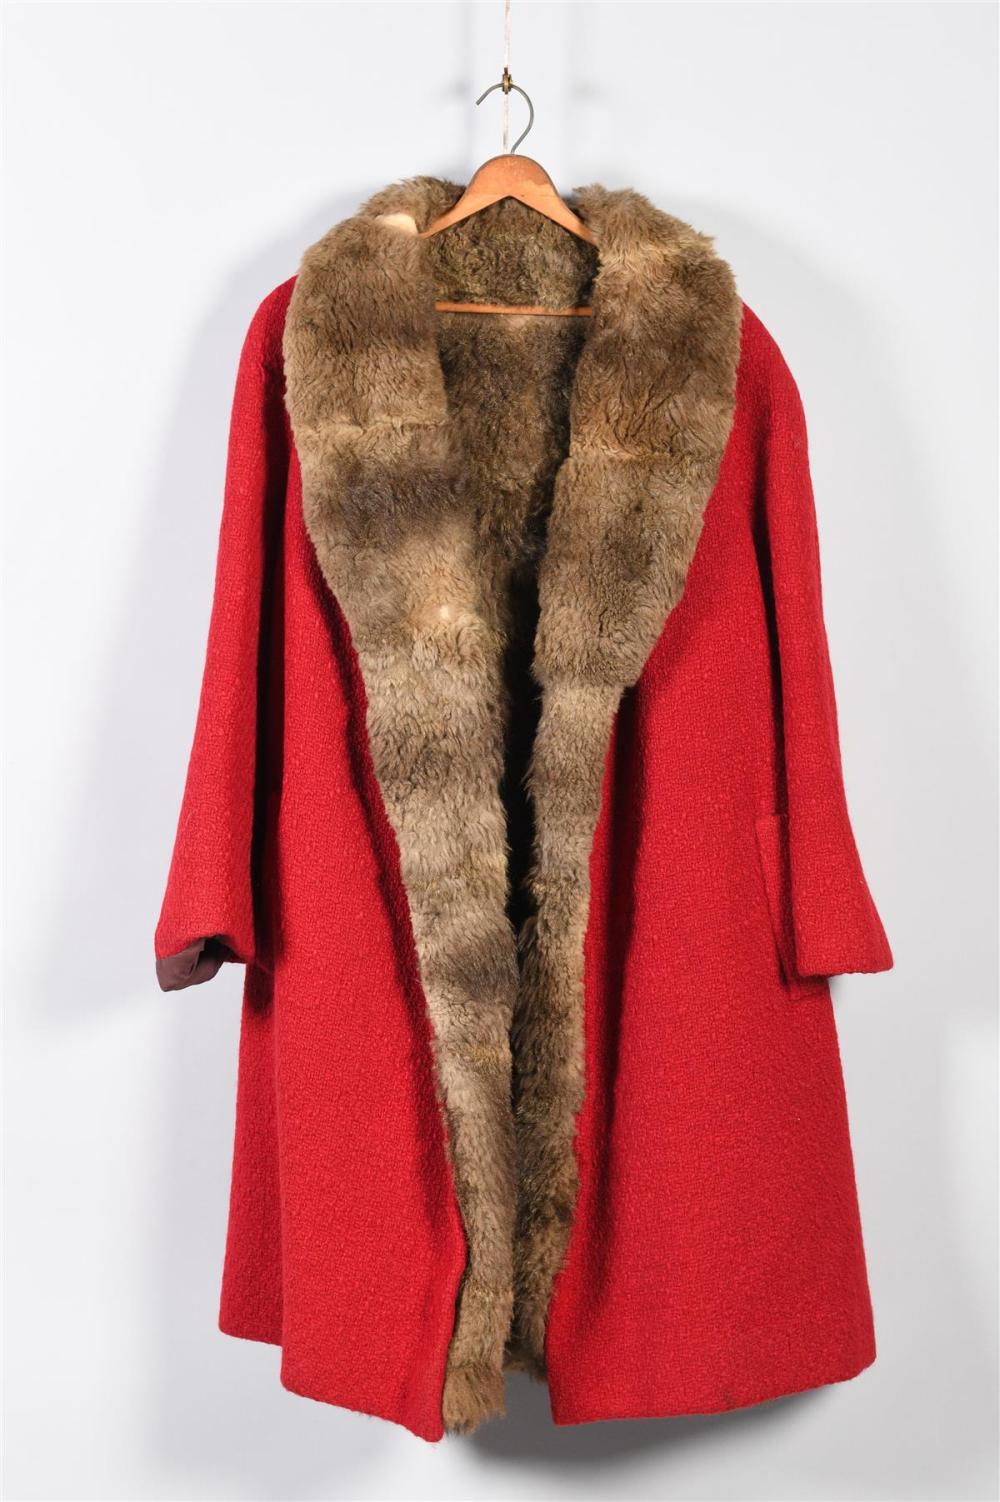 RED WOOL COAT WITH SHEEPSKIN LININGRED